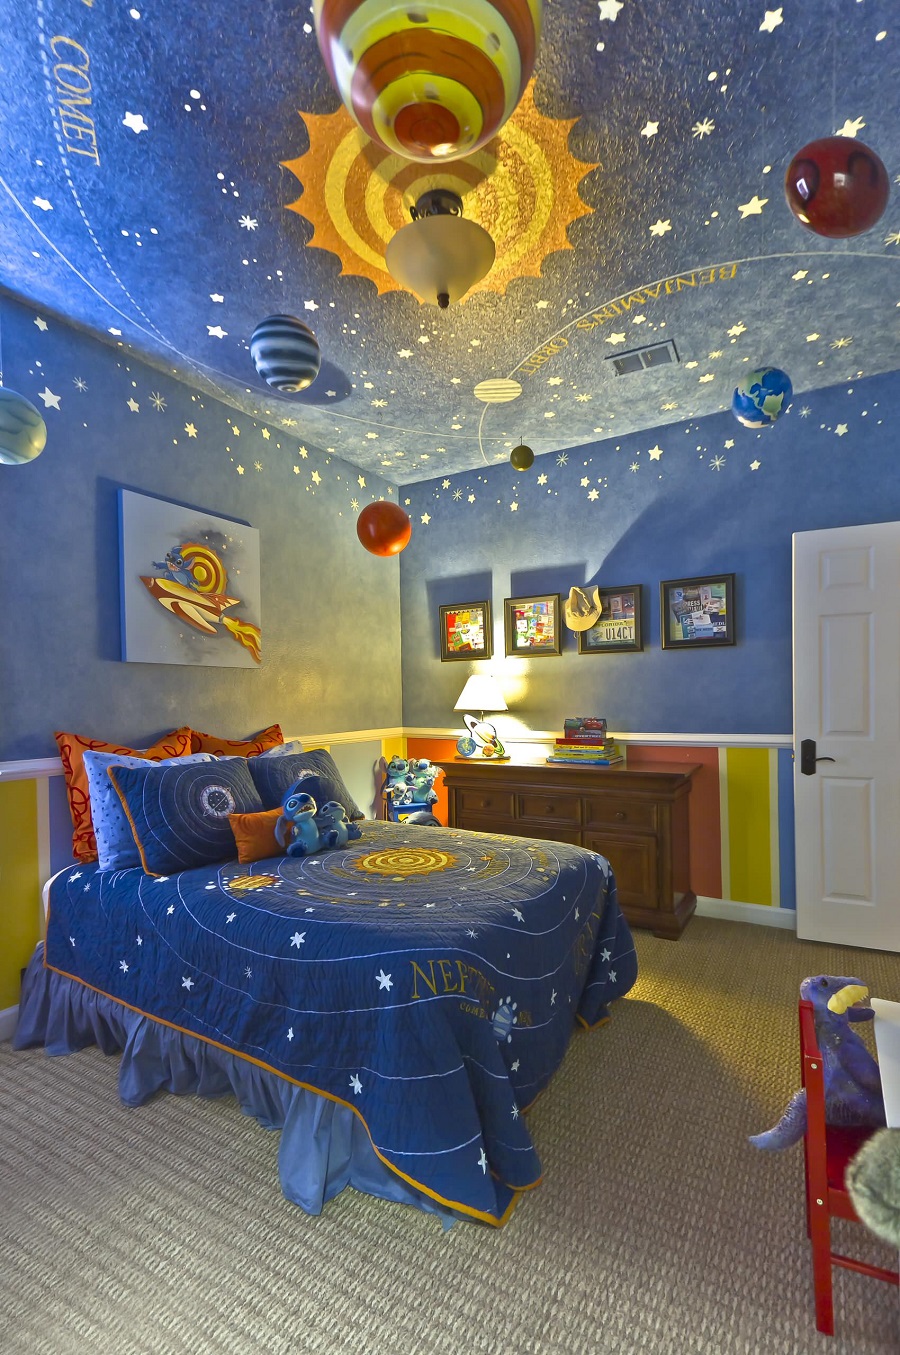 I Think This Is A Room For A Future Astronaut.